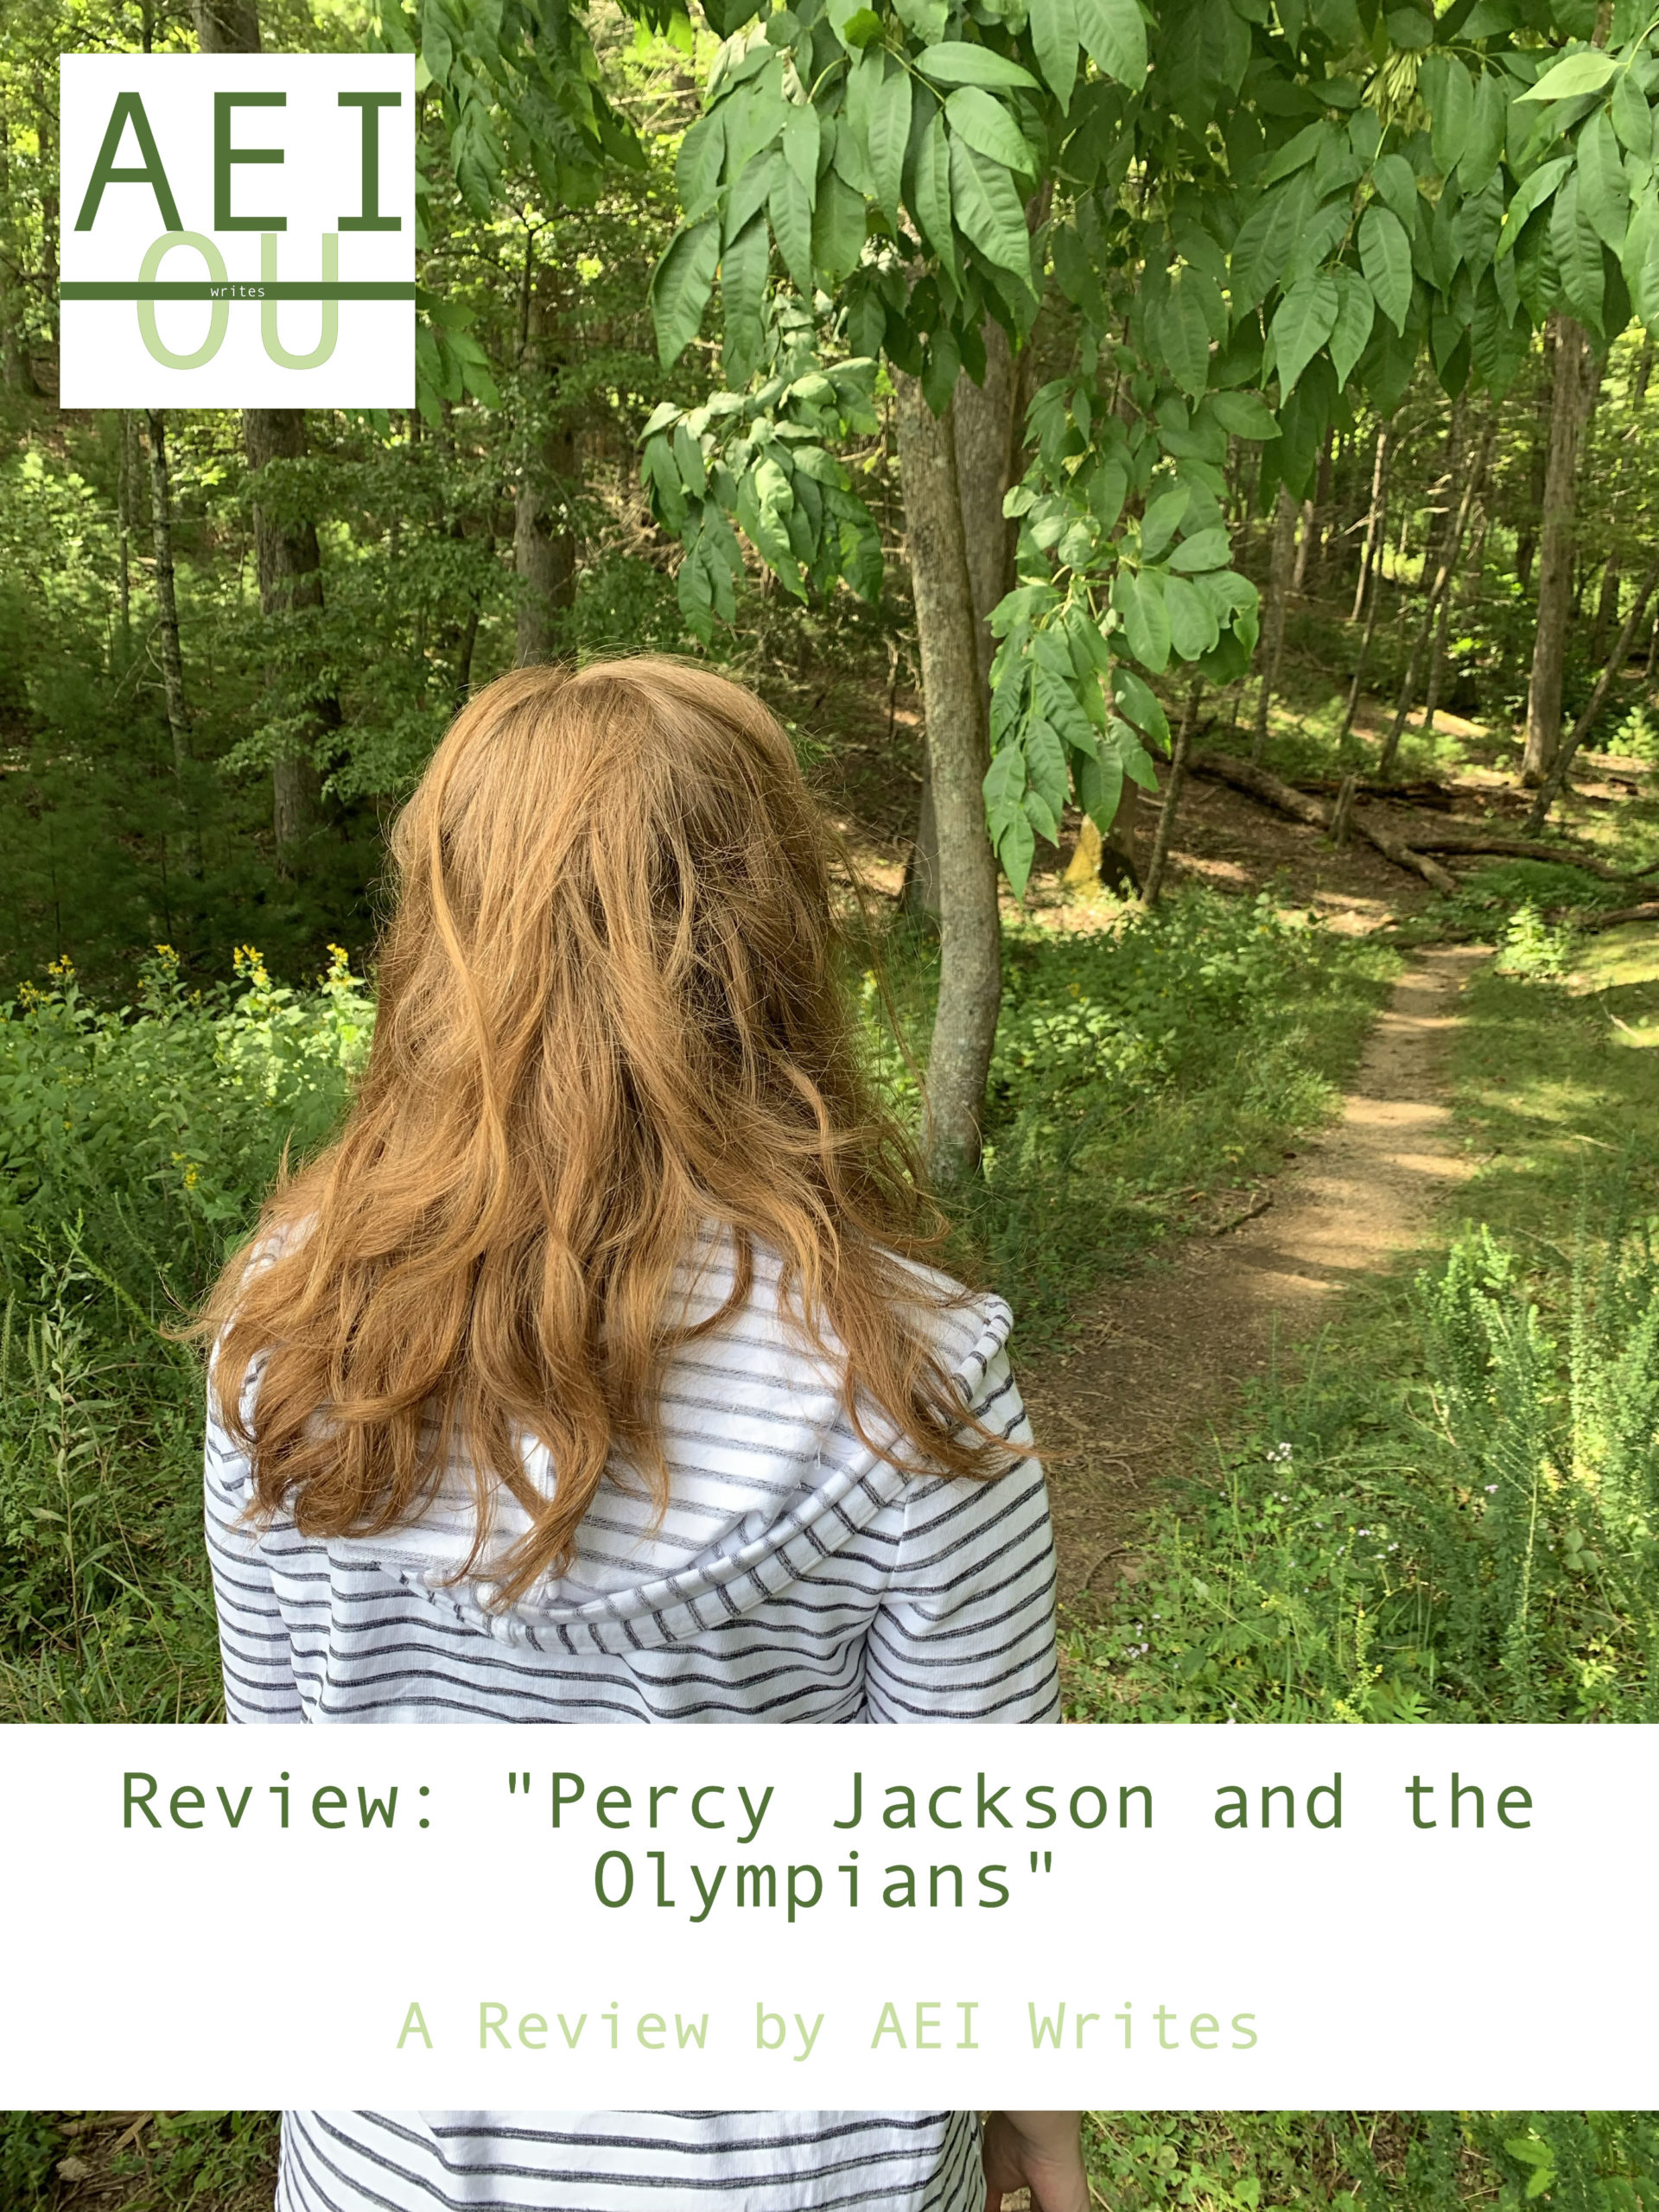 Review: Percy Jackson and the Olympians